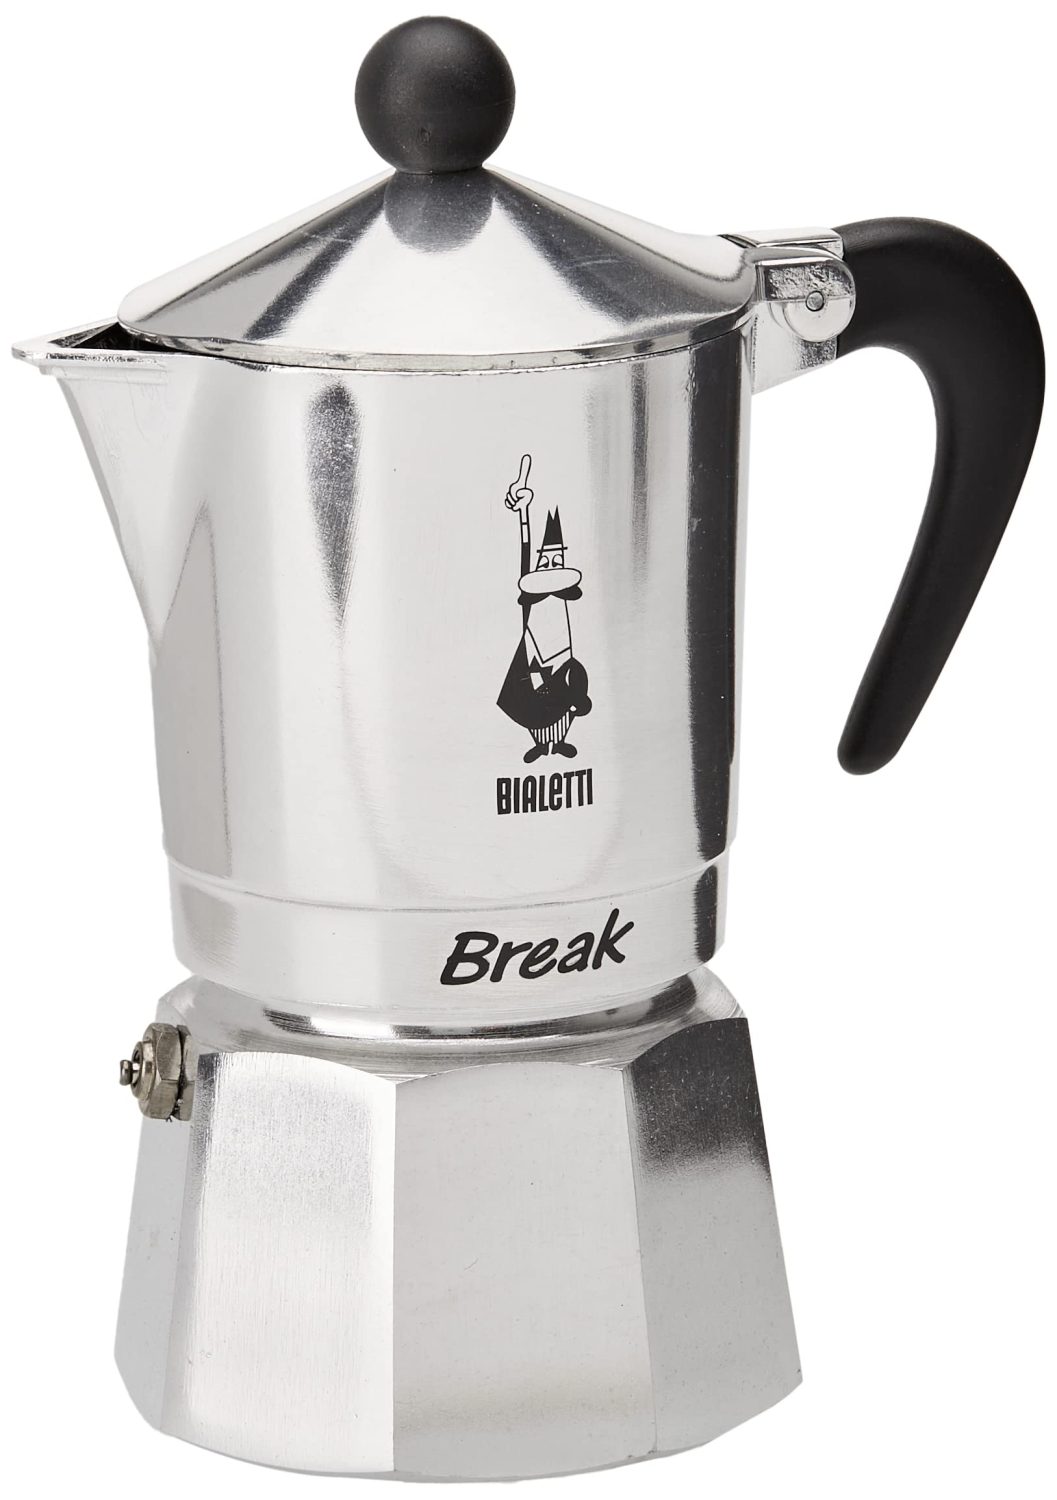 How Many Cups Does A 3-cup Bialetti Make?